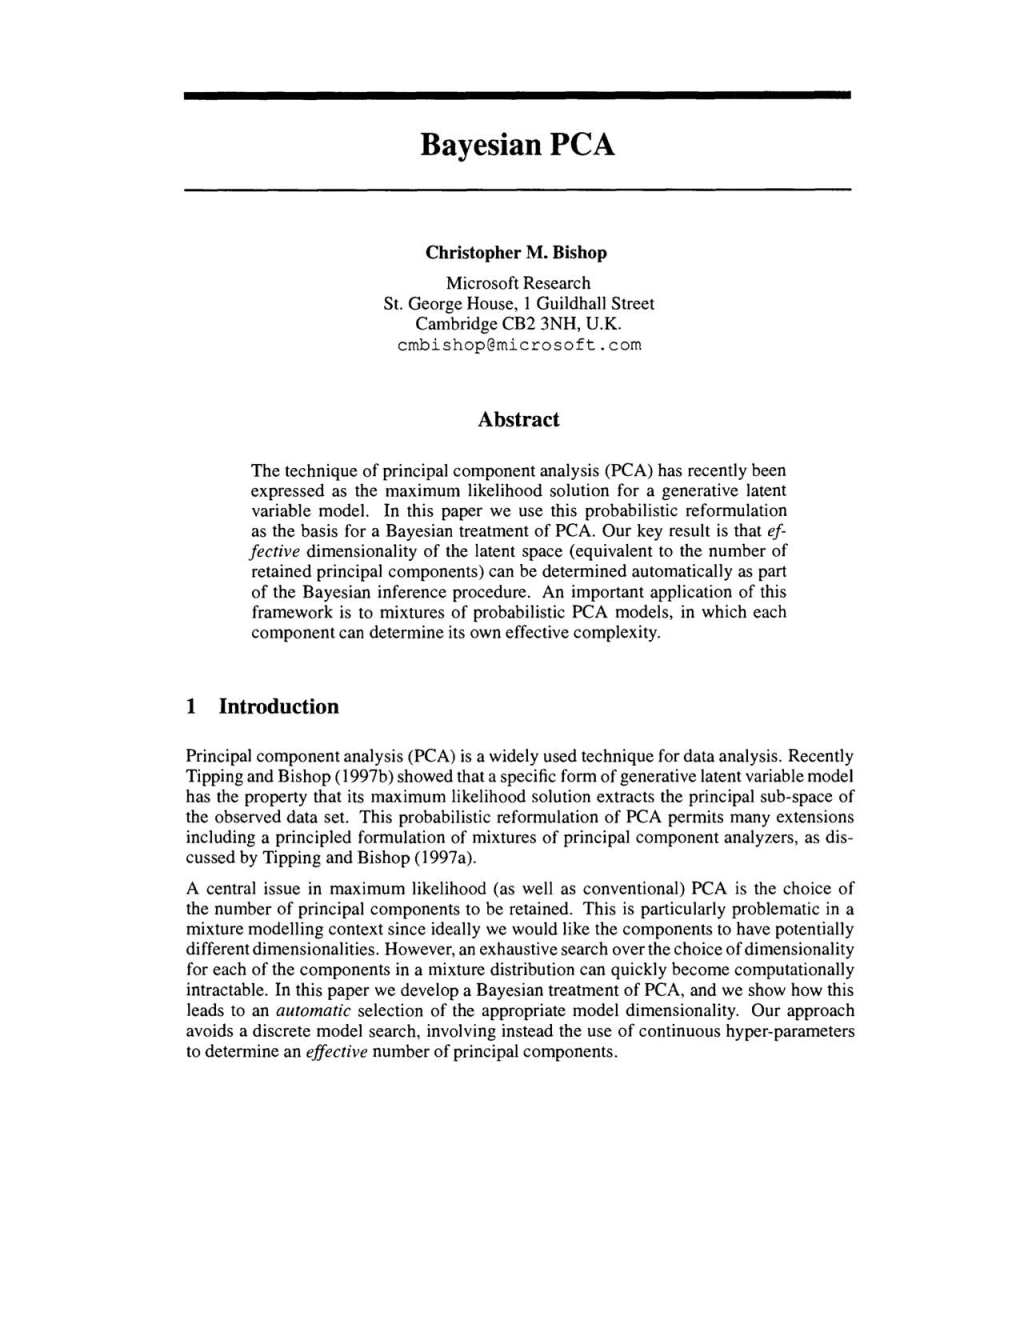 Paper on Bayesian